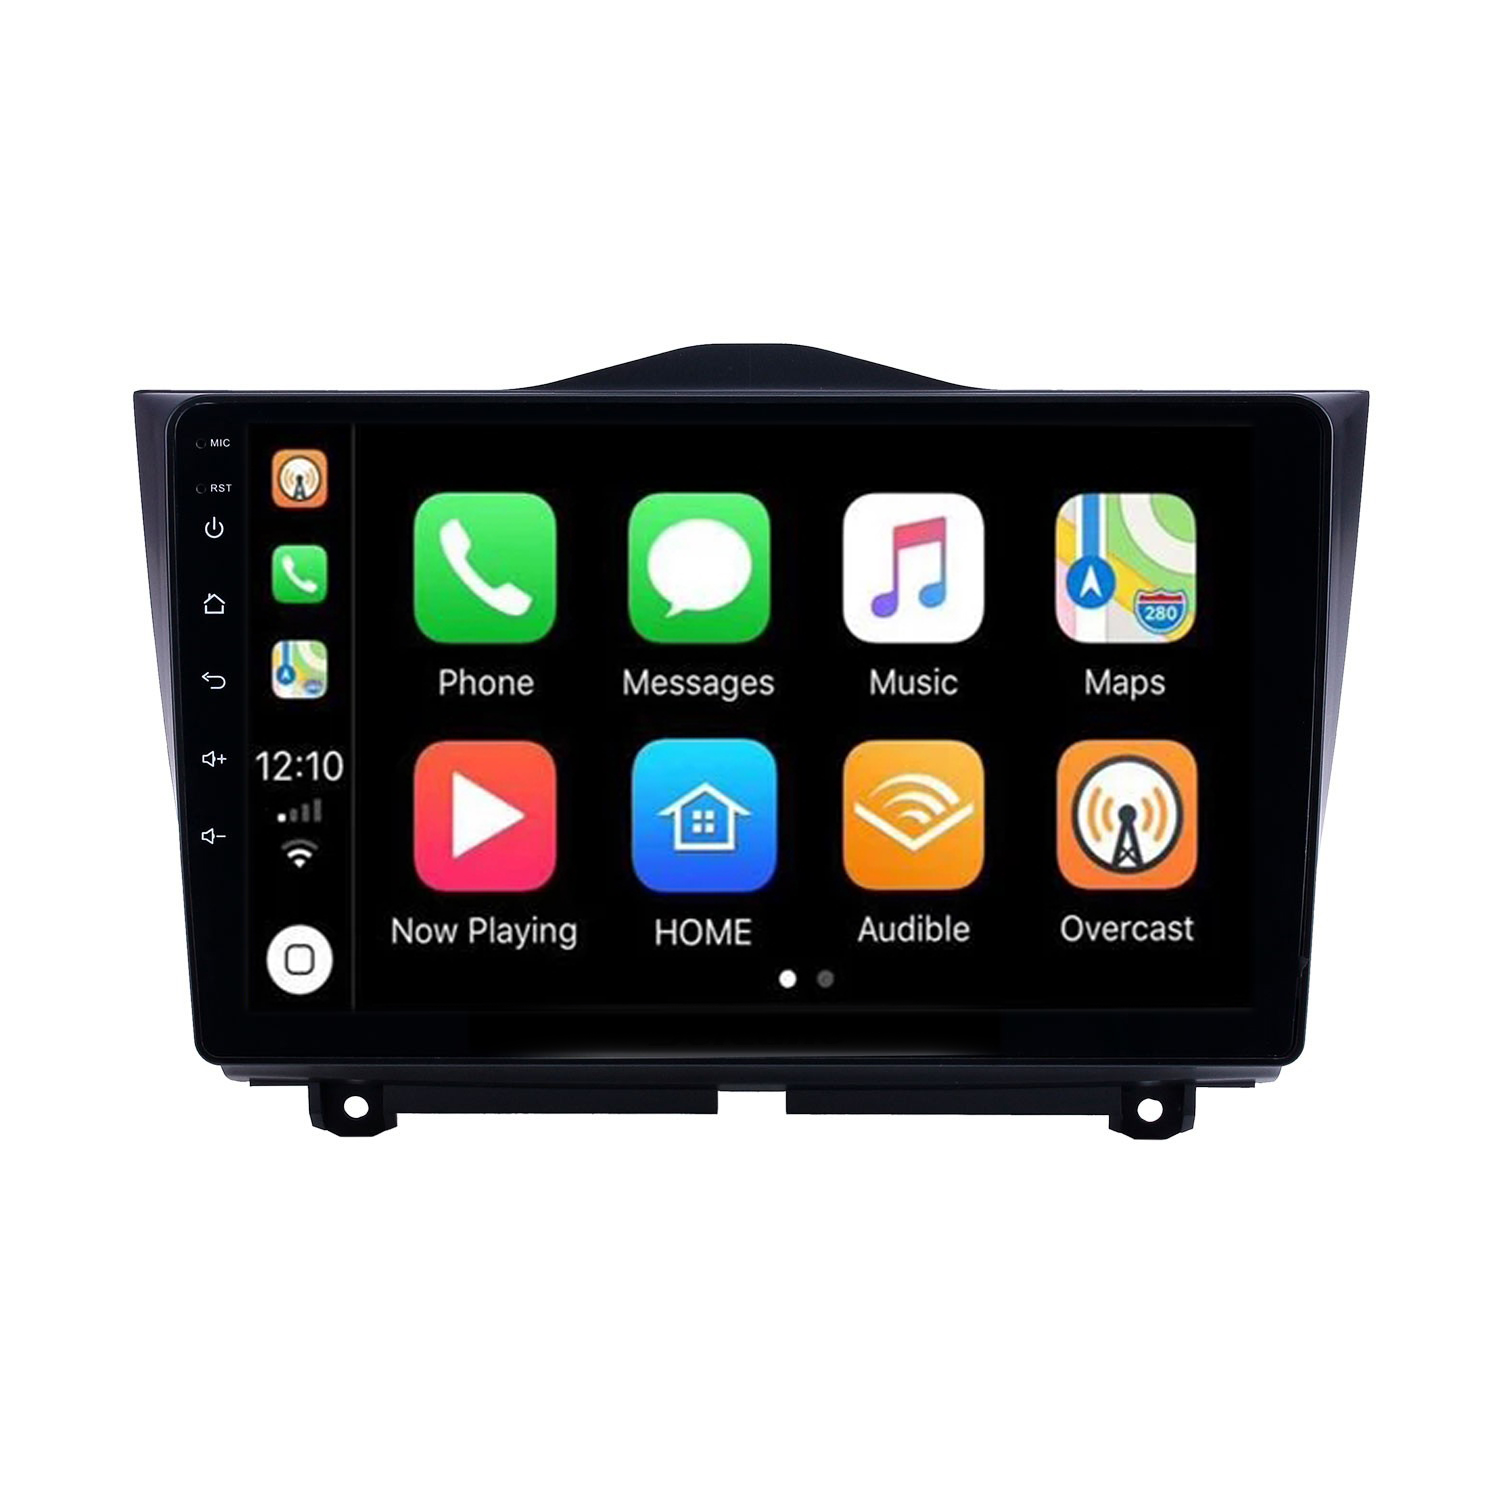 

HD Touchscreen Car 9 inch Android Video GPS Navigation Radio for 2018-2019 Lada Granta with Bluetooth AUX WIFI support Carplay DAB+ DVR OBD